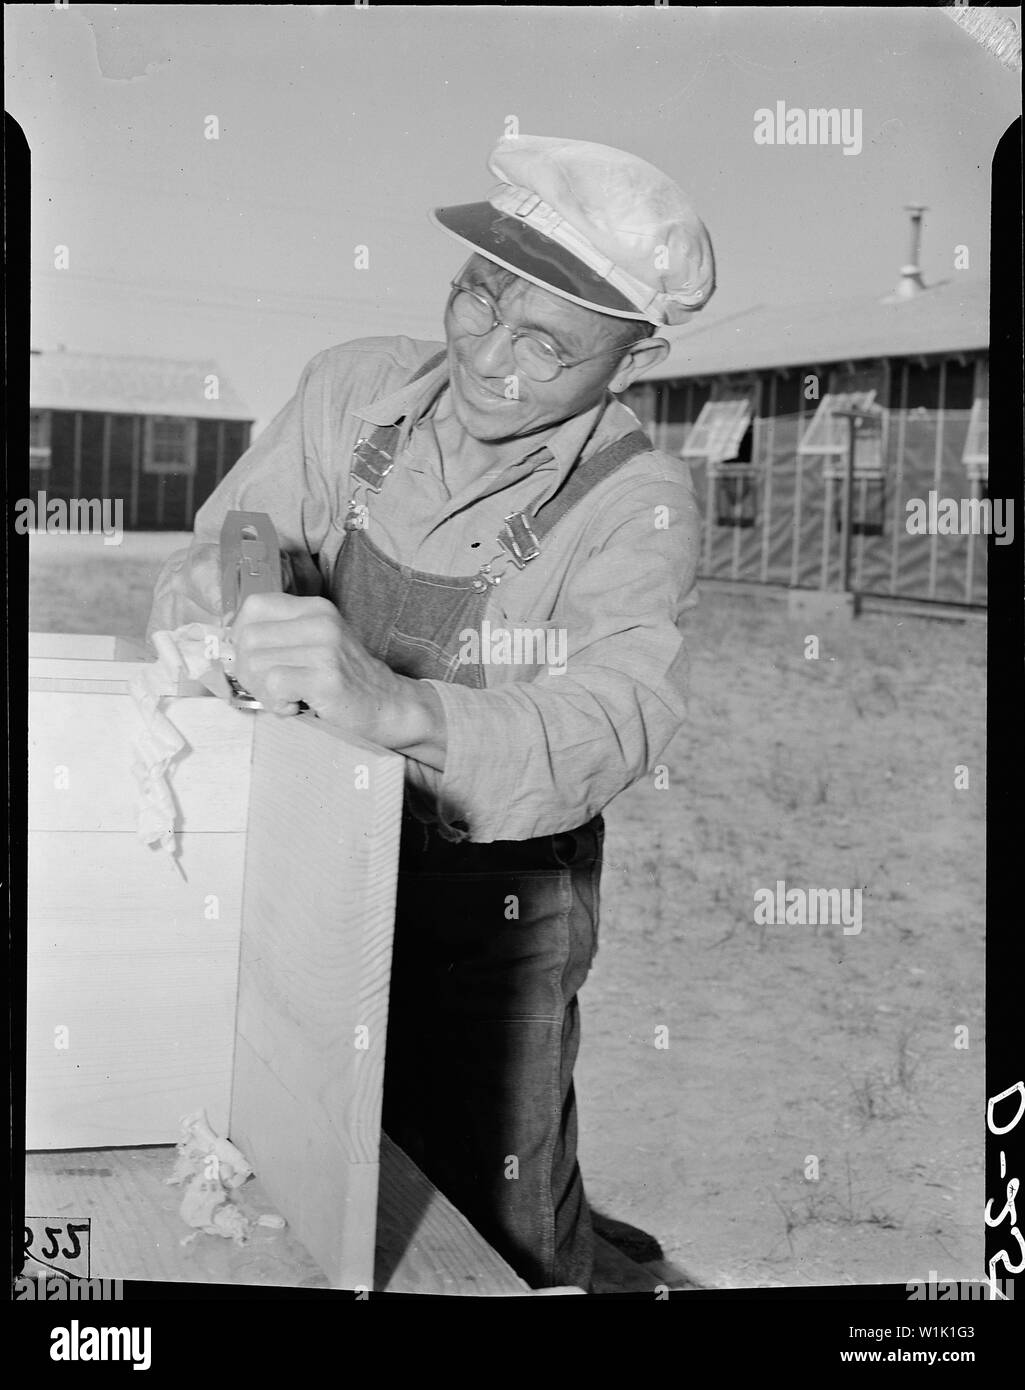 Tule Lake Relocation Center, Newell, California. Shinkichi Kyono, 56, carpenter-evacuee from Longvi . . .; Scope and content:  The full caption for this photograph reads: Tule Lake Relocation Center, Newell, California. Shinkichi Kyono, 56, carpenter-evacuee from Longview, Washington, is shown using a carpenter's plane which he won as first prize in a furniture contest conducted among the evacuees of Japanese descent at this War Relocation Authority center. Stock Photo